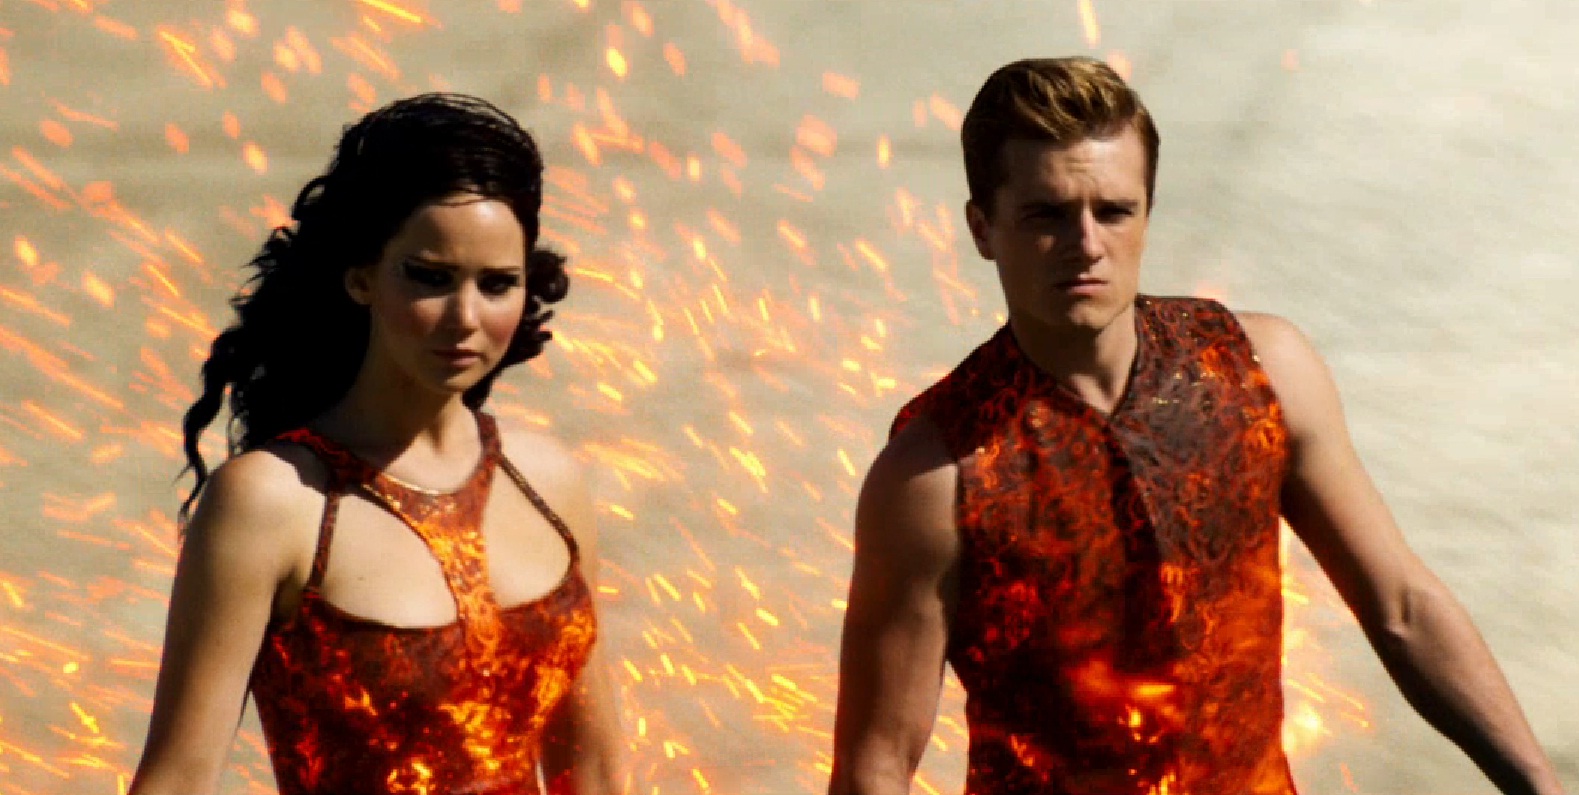 Catching fire 1